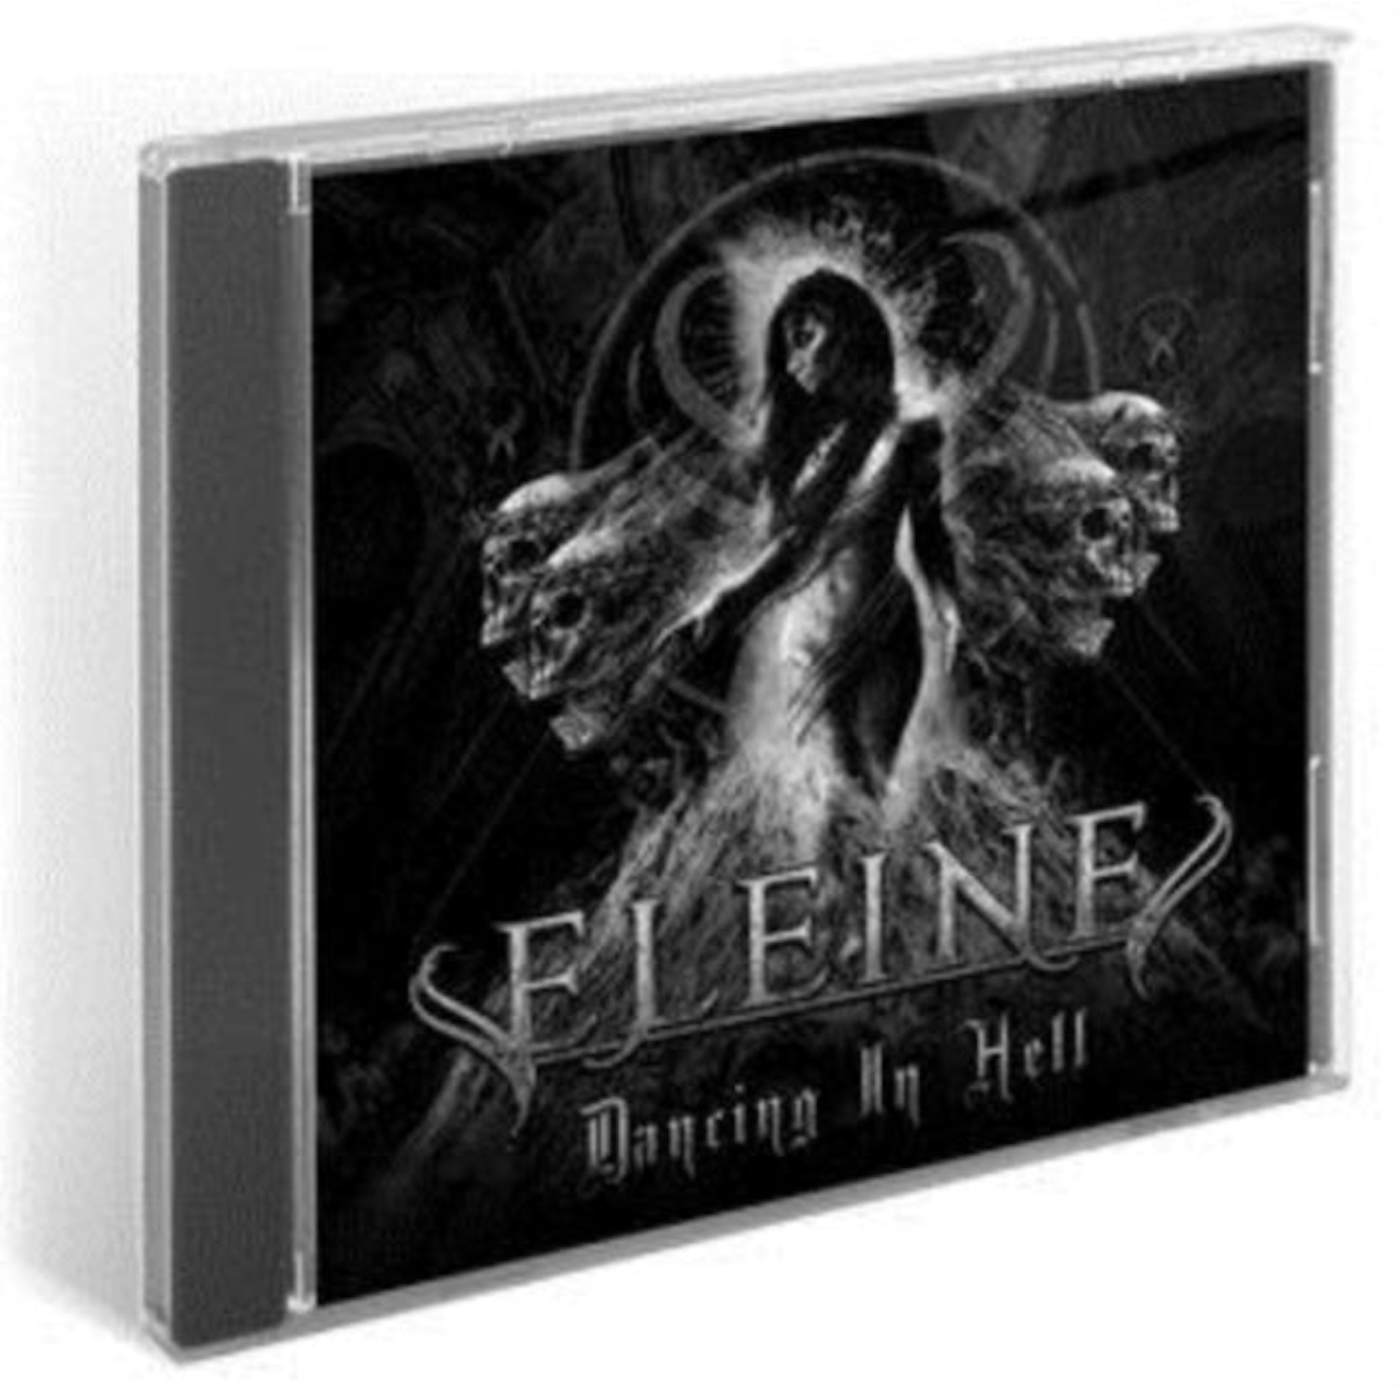 Eleine CD - Dancing In Hell (Black & White Cover)